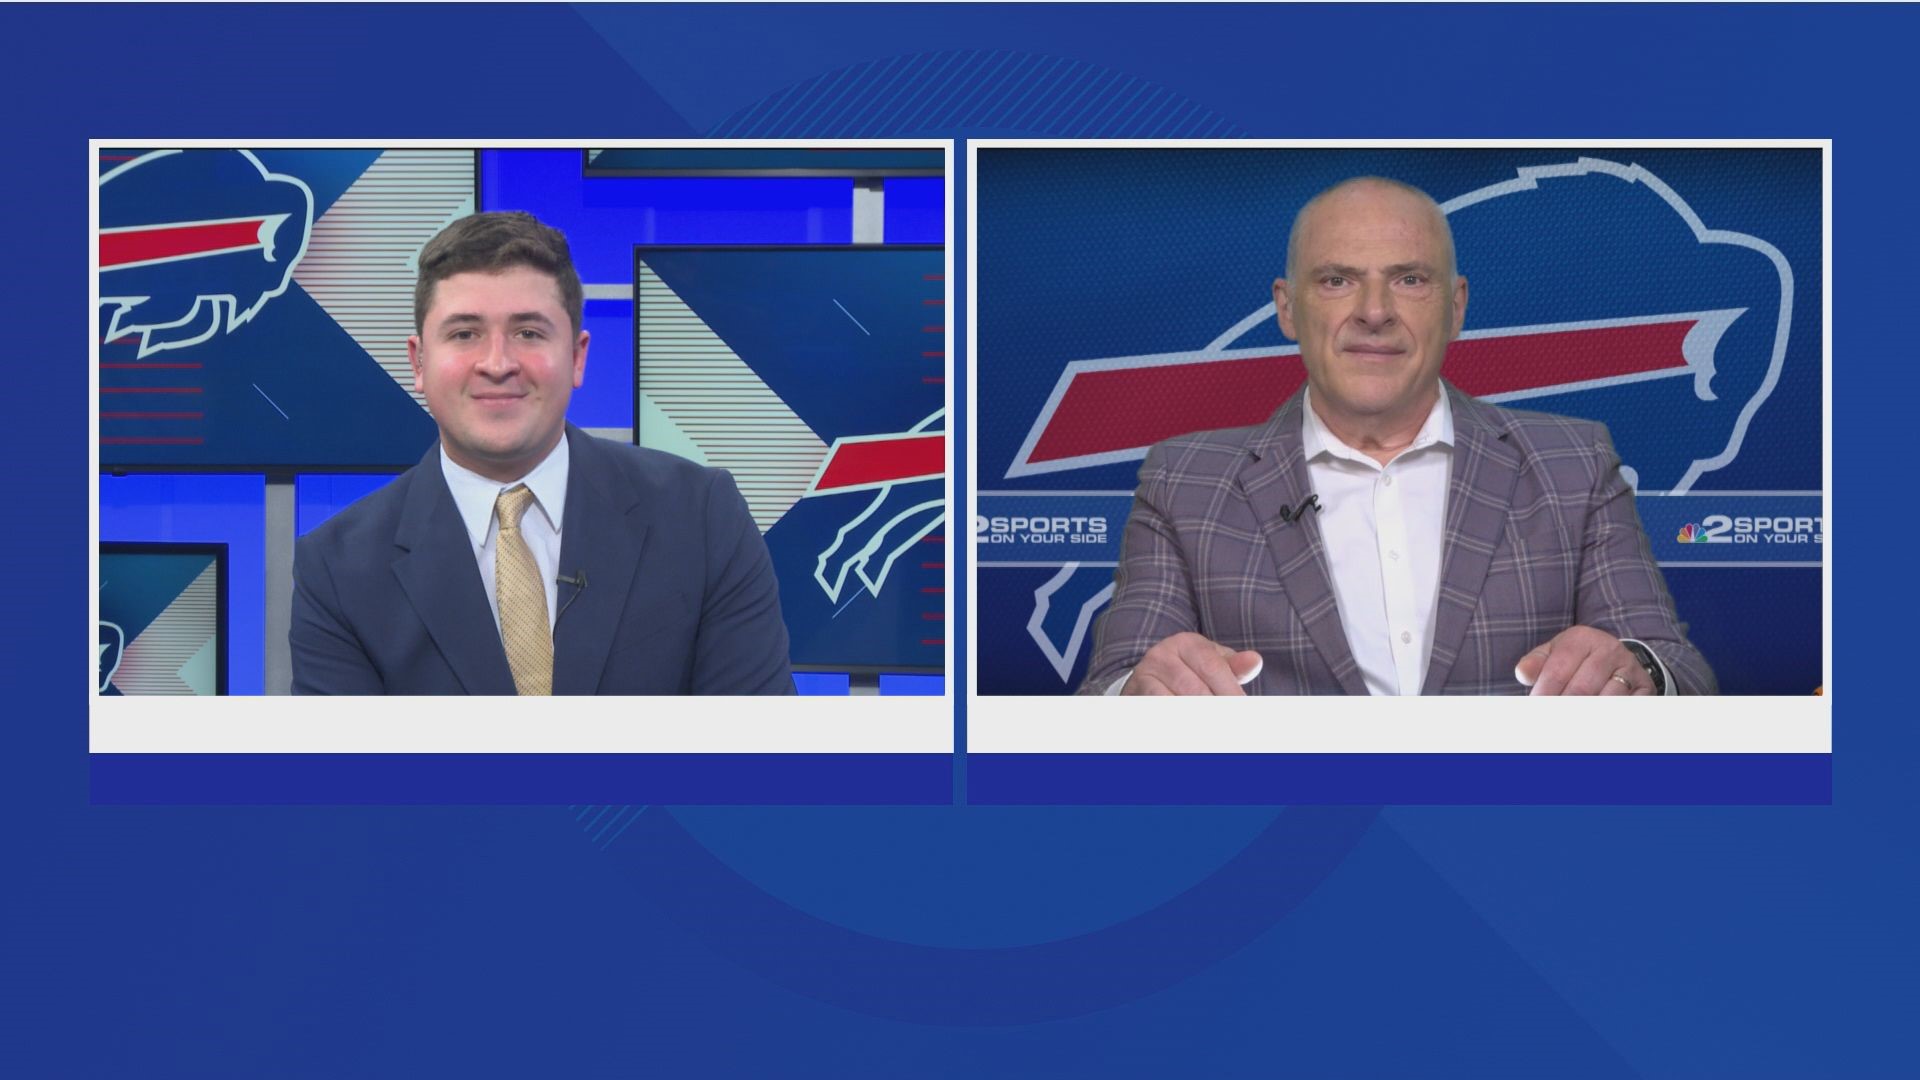 2 On Your Sides Jonathan Acosta chats with NFL Analyst Vic Carucci about a potential Bills' sale and the upcoming NFL draft.